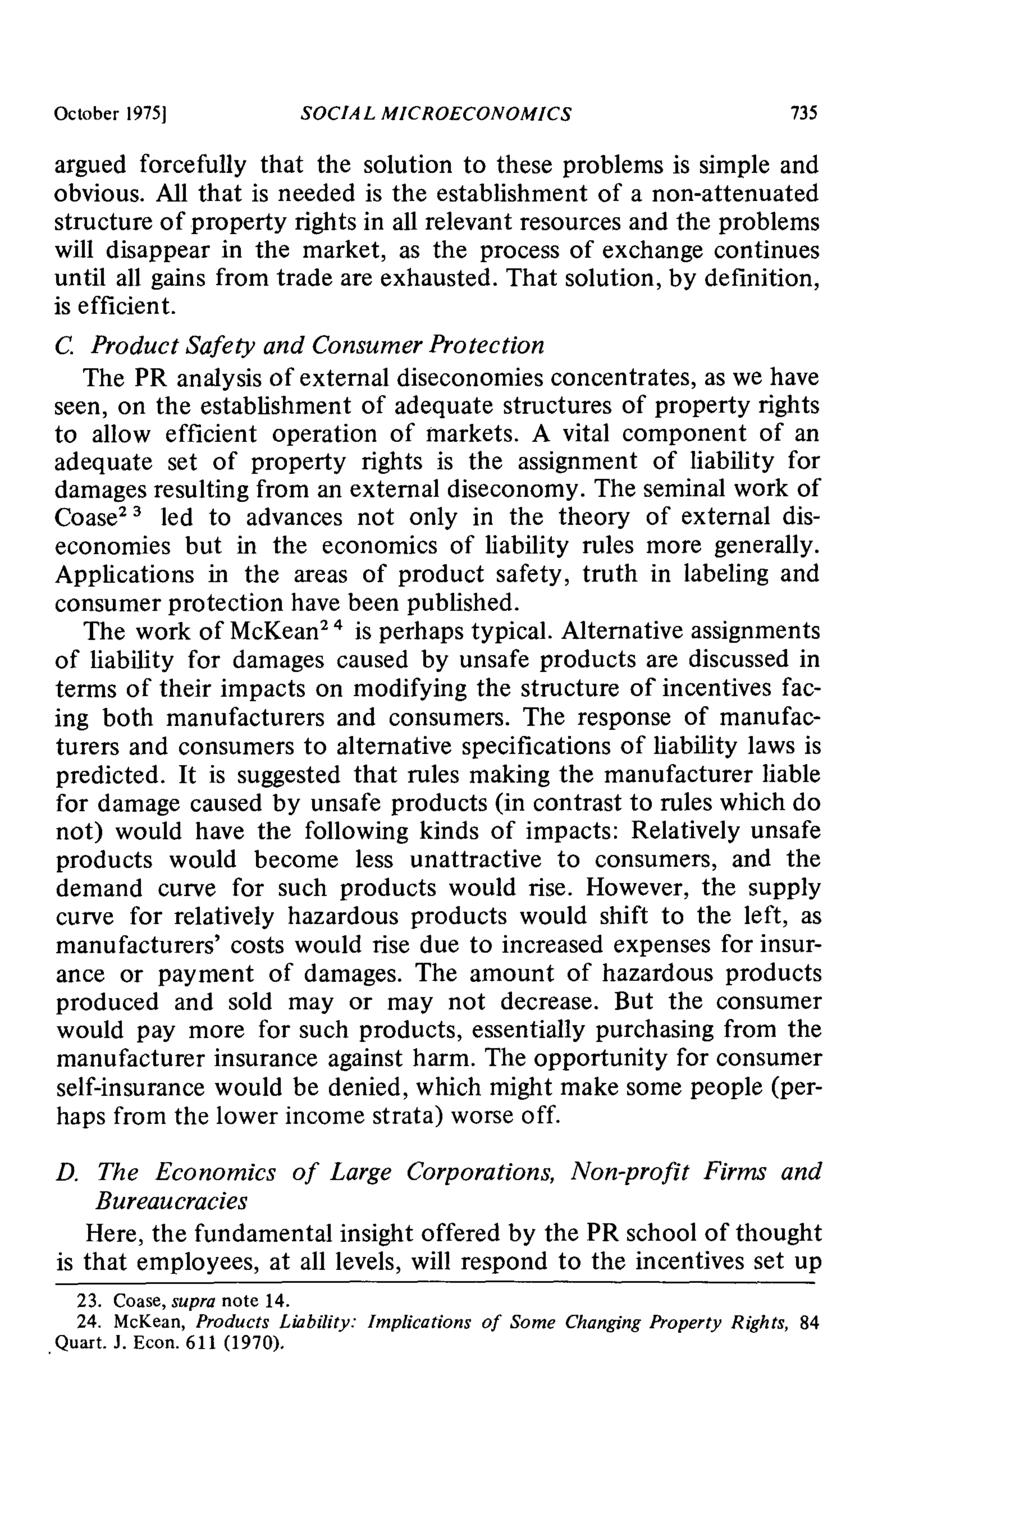 October 1975] SOCIAL MICROECONOMICS argued forcefully that the solution to these problems is simple and obvious.